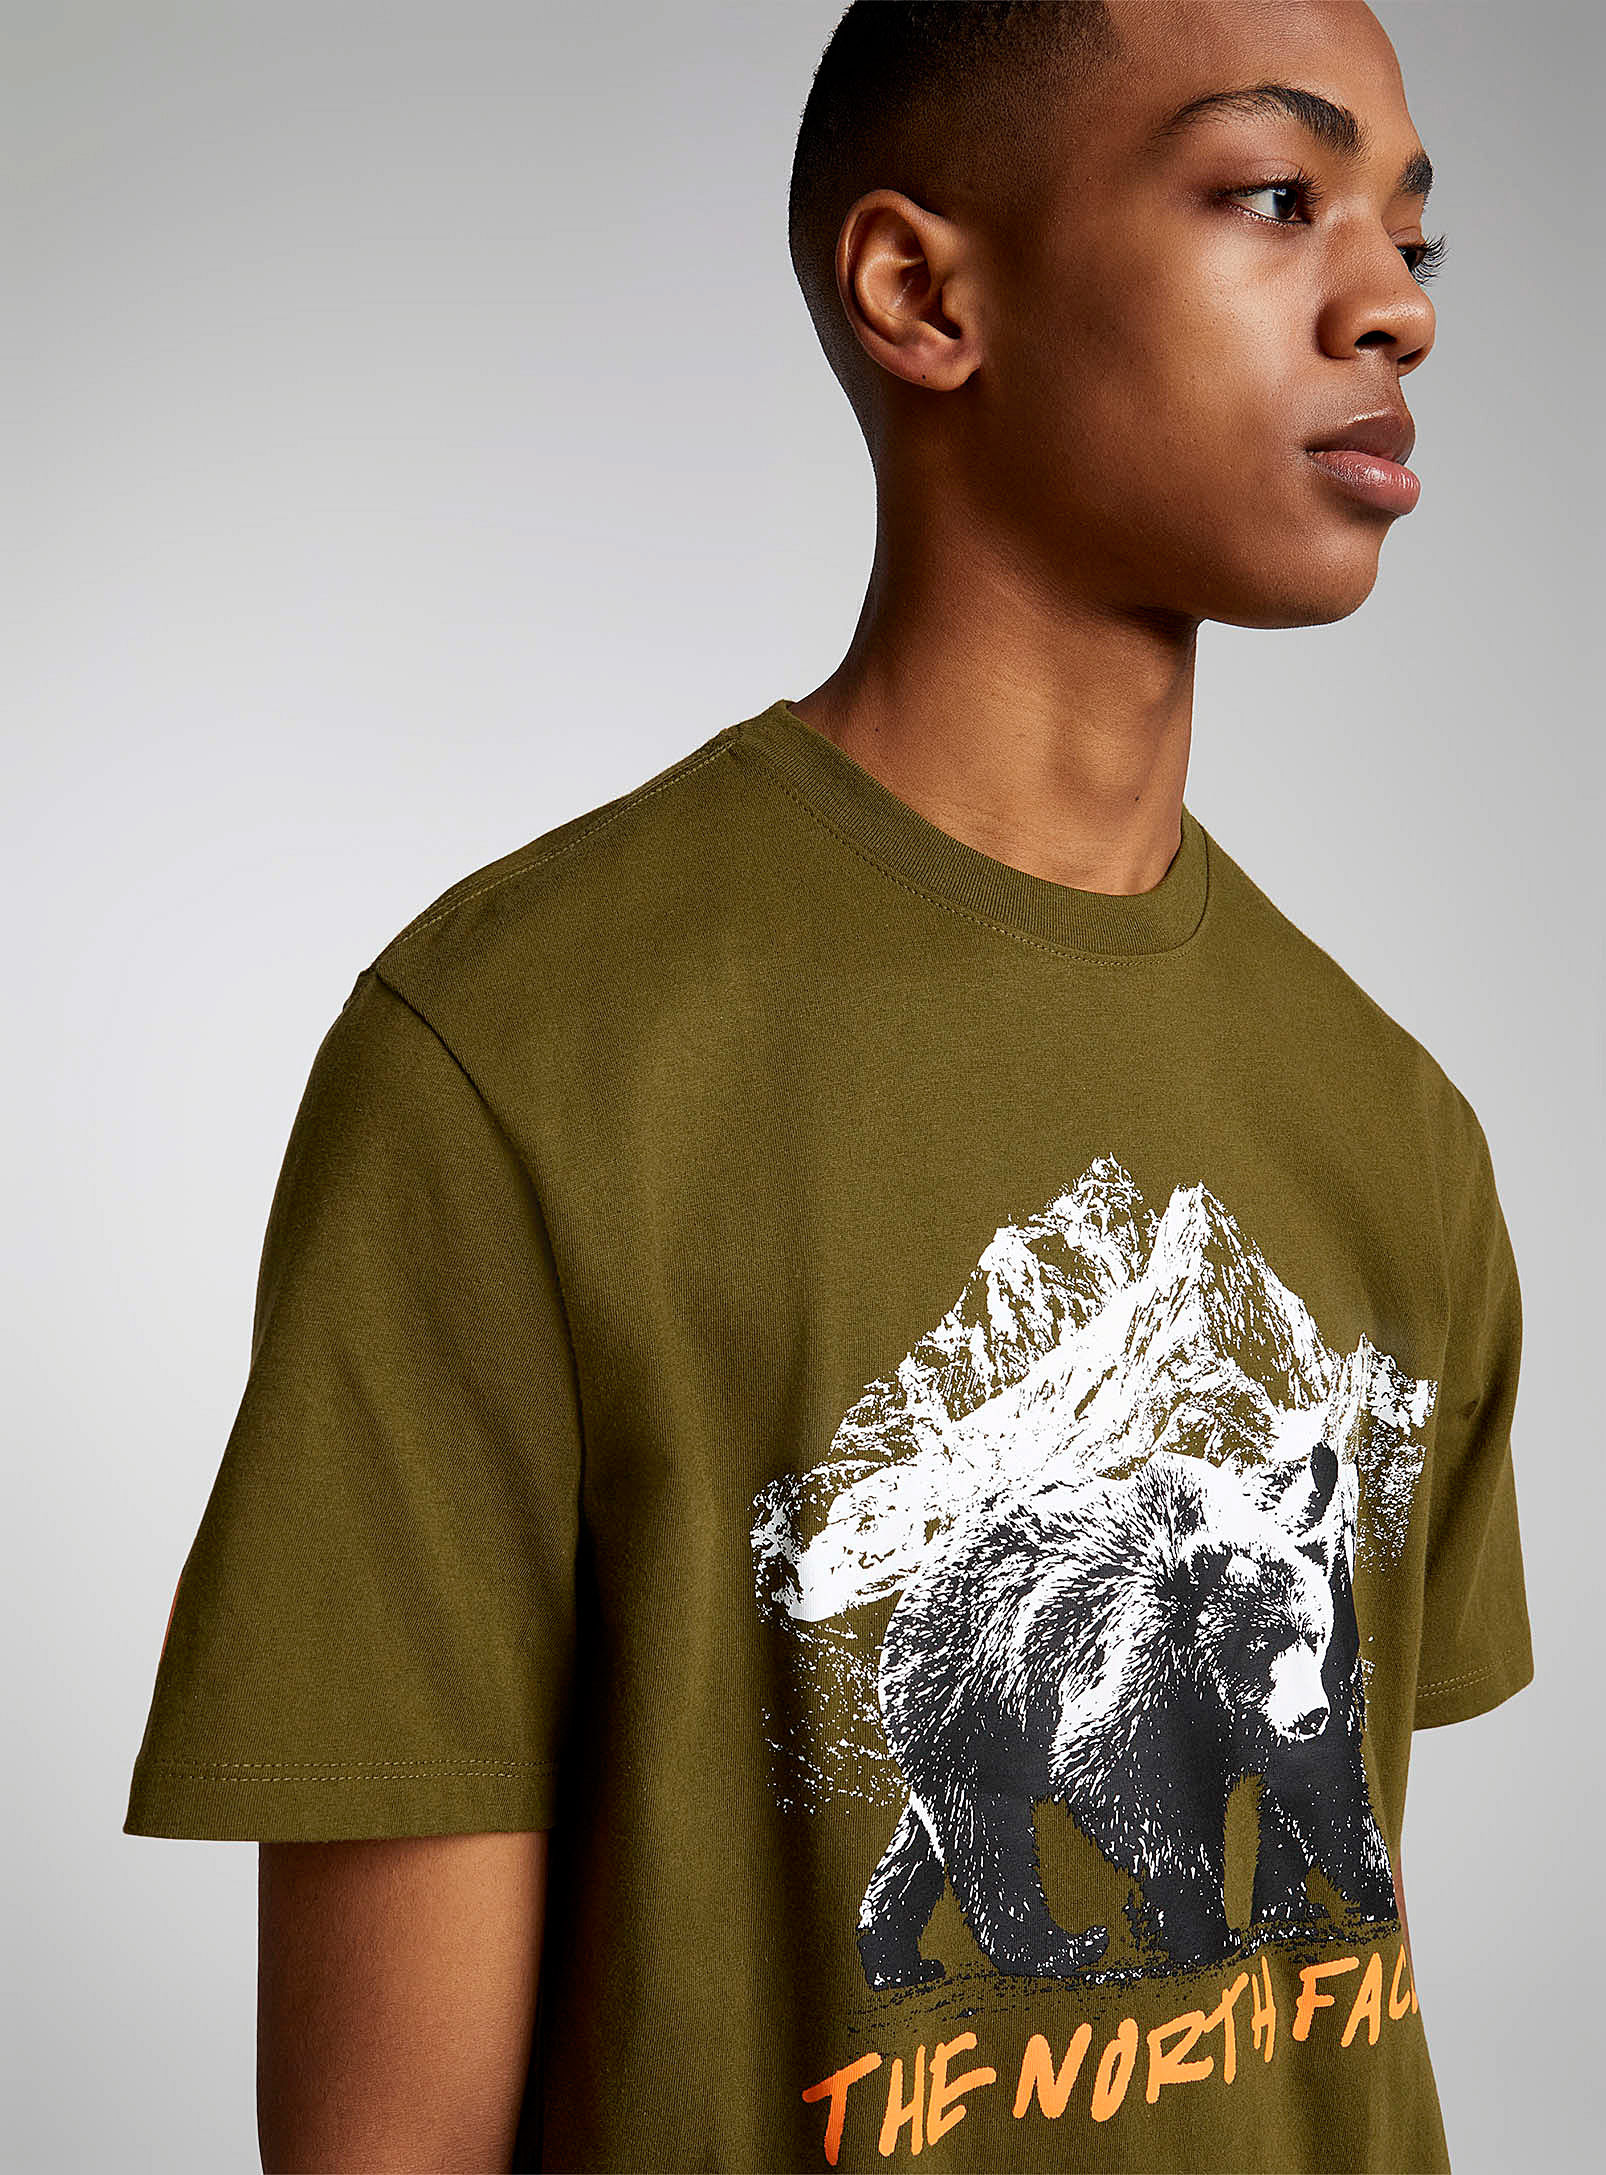 The North Face - Men's Grizzly mountain T-shirt